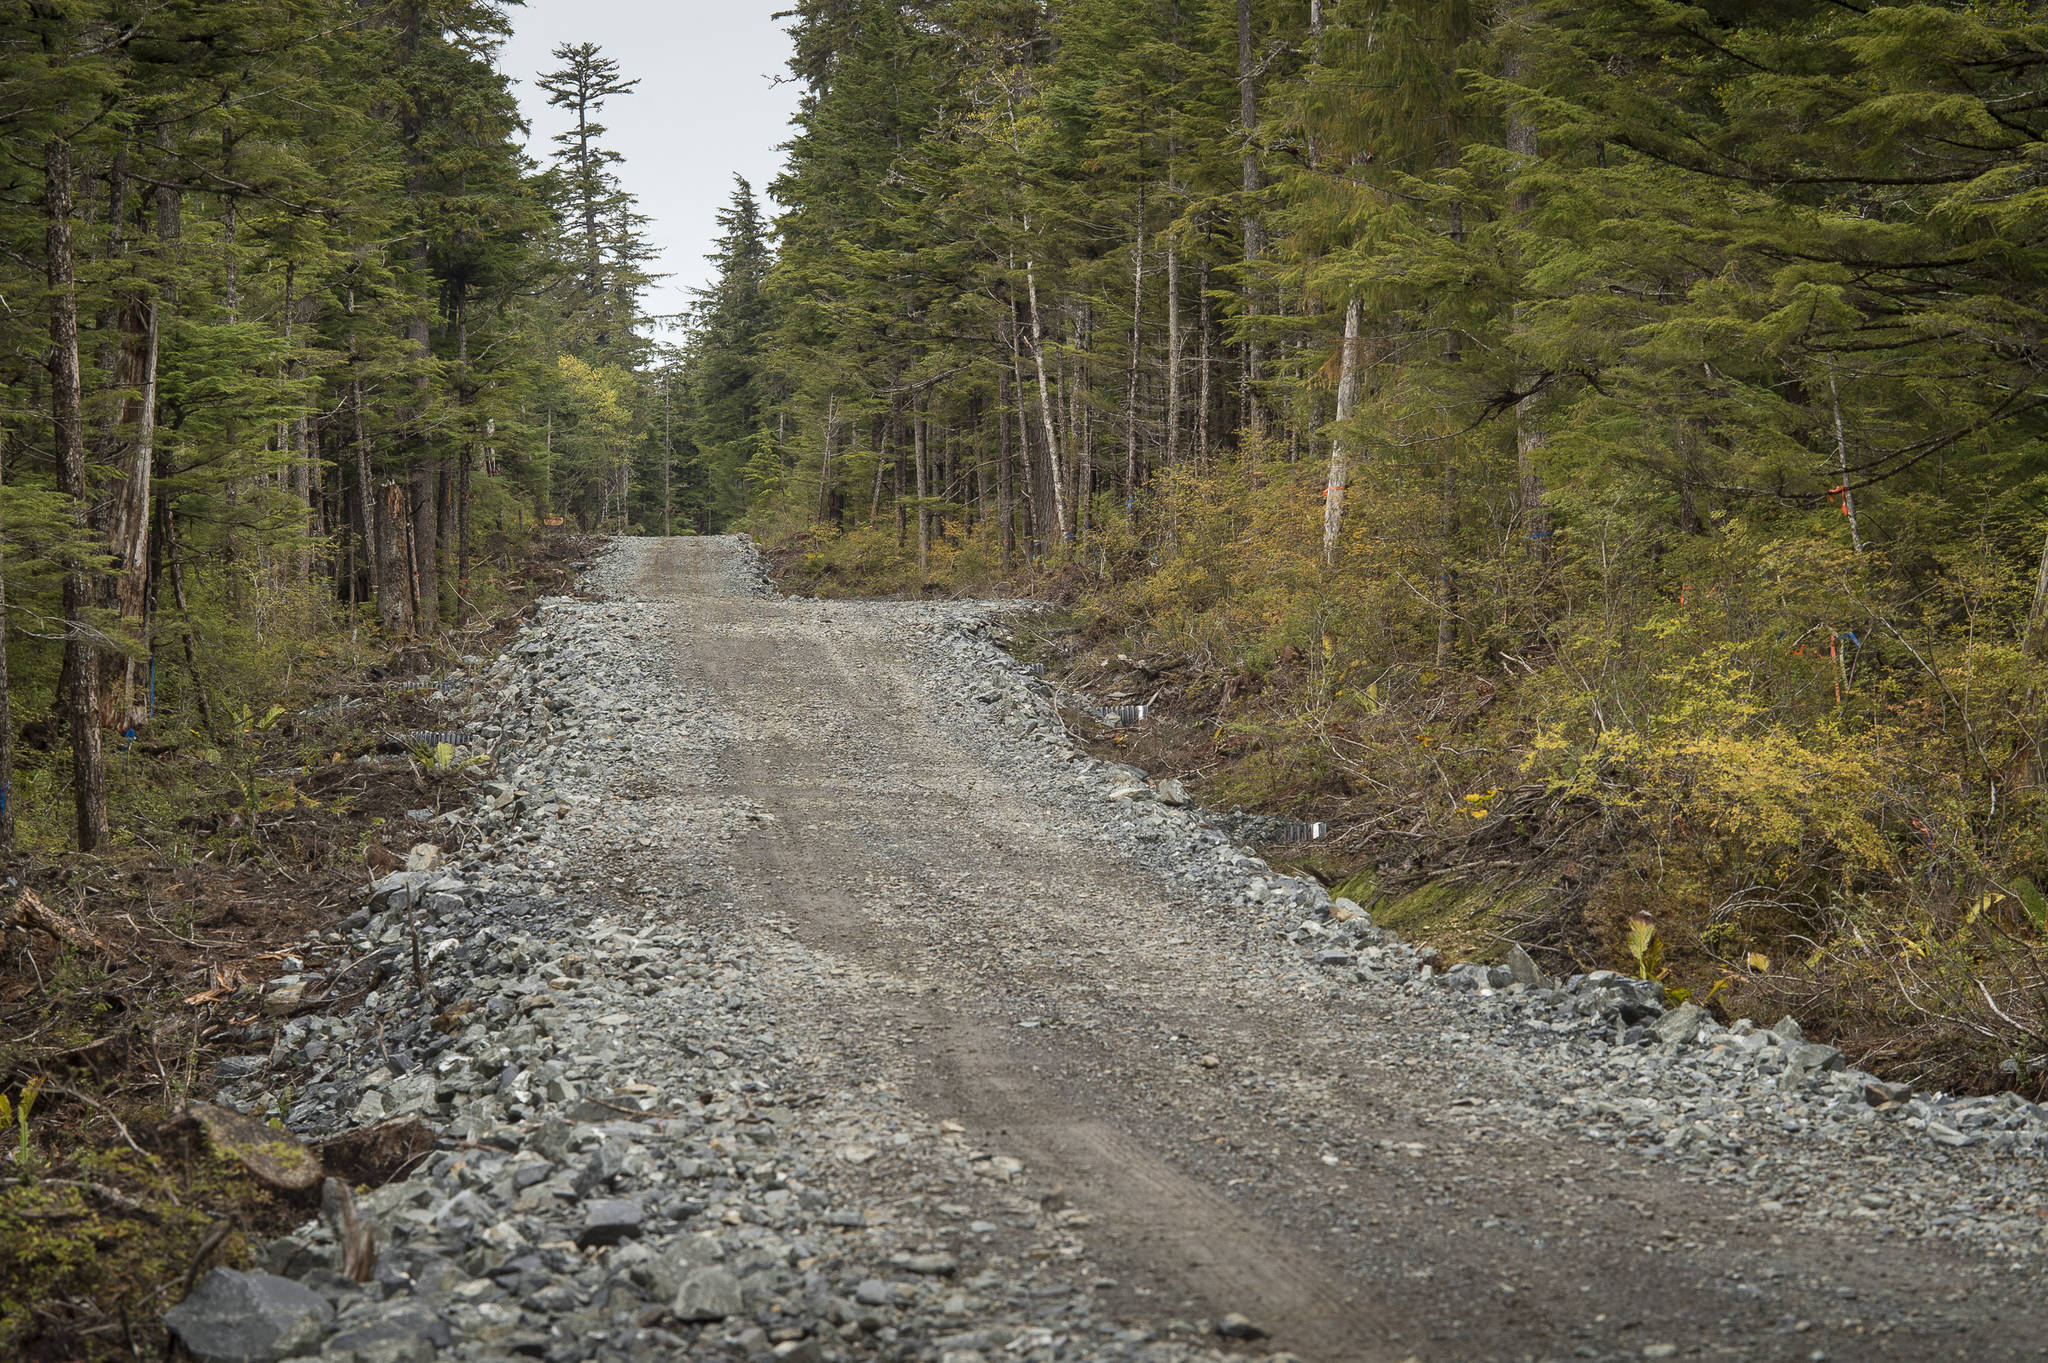 A stretch of the 3.5 mile West Douglas Pioneer Road on Friday, Sept. 28, 2018. (Michael Penn | Juneau Empire)